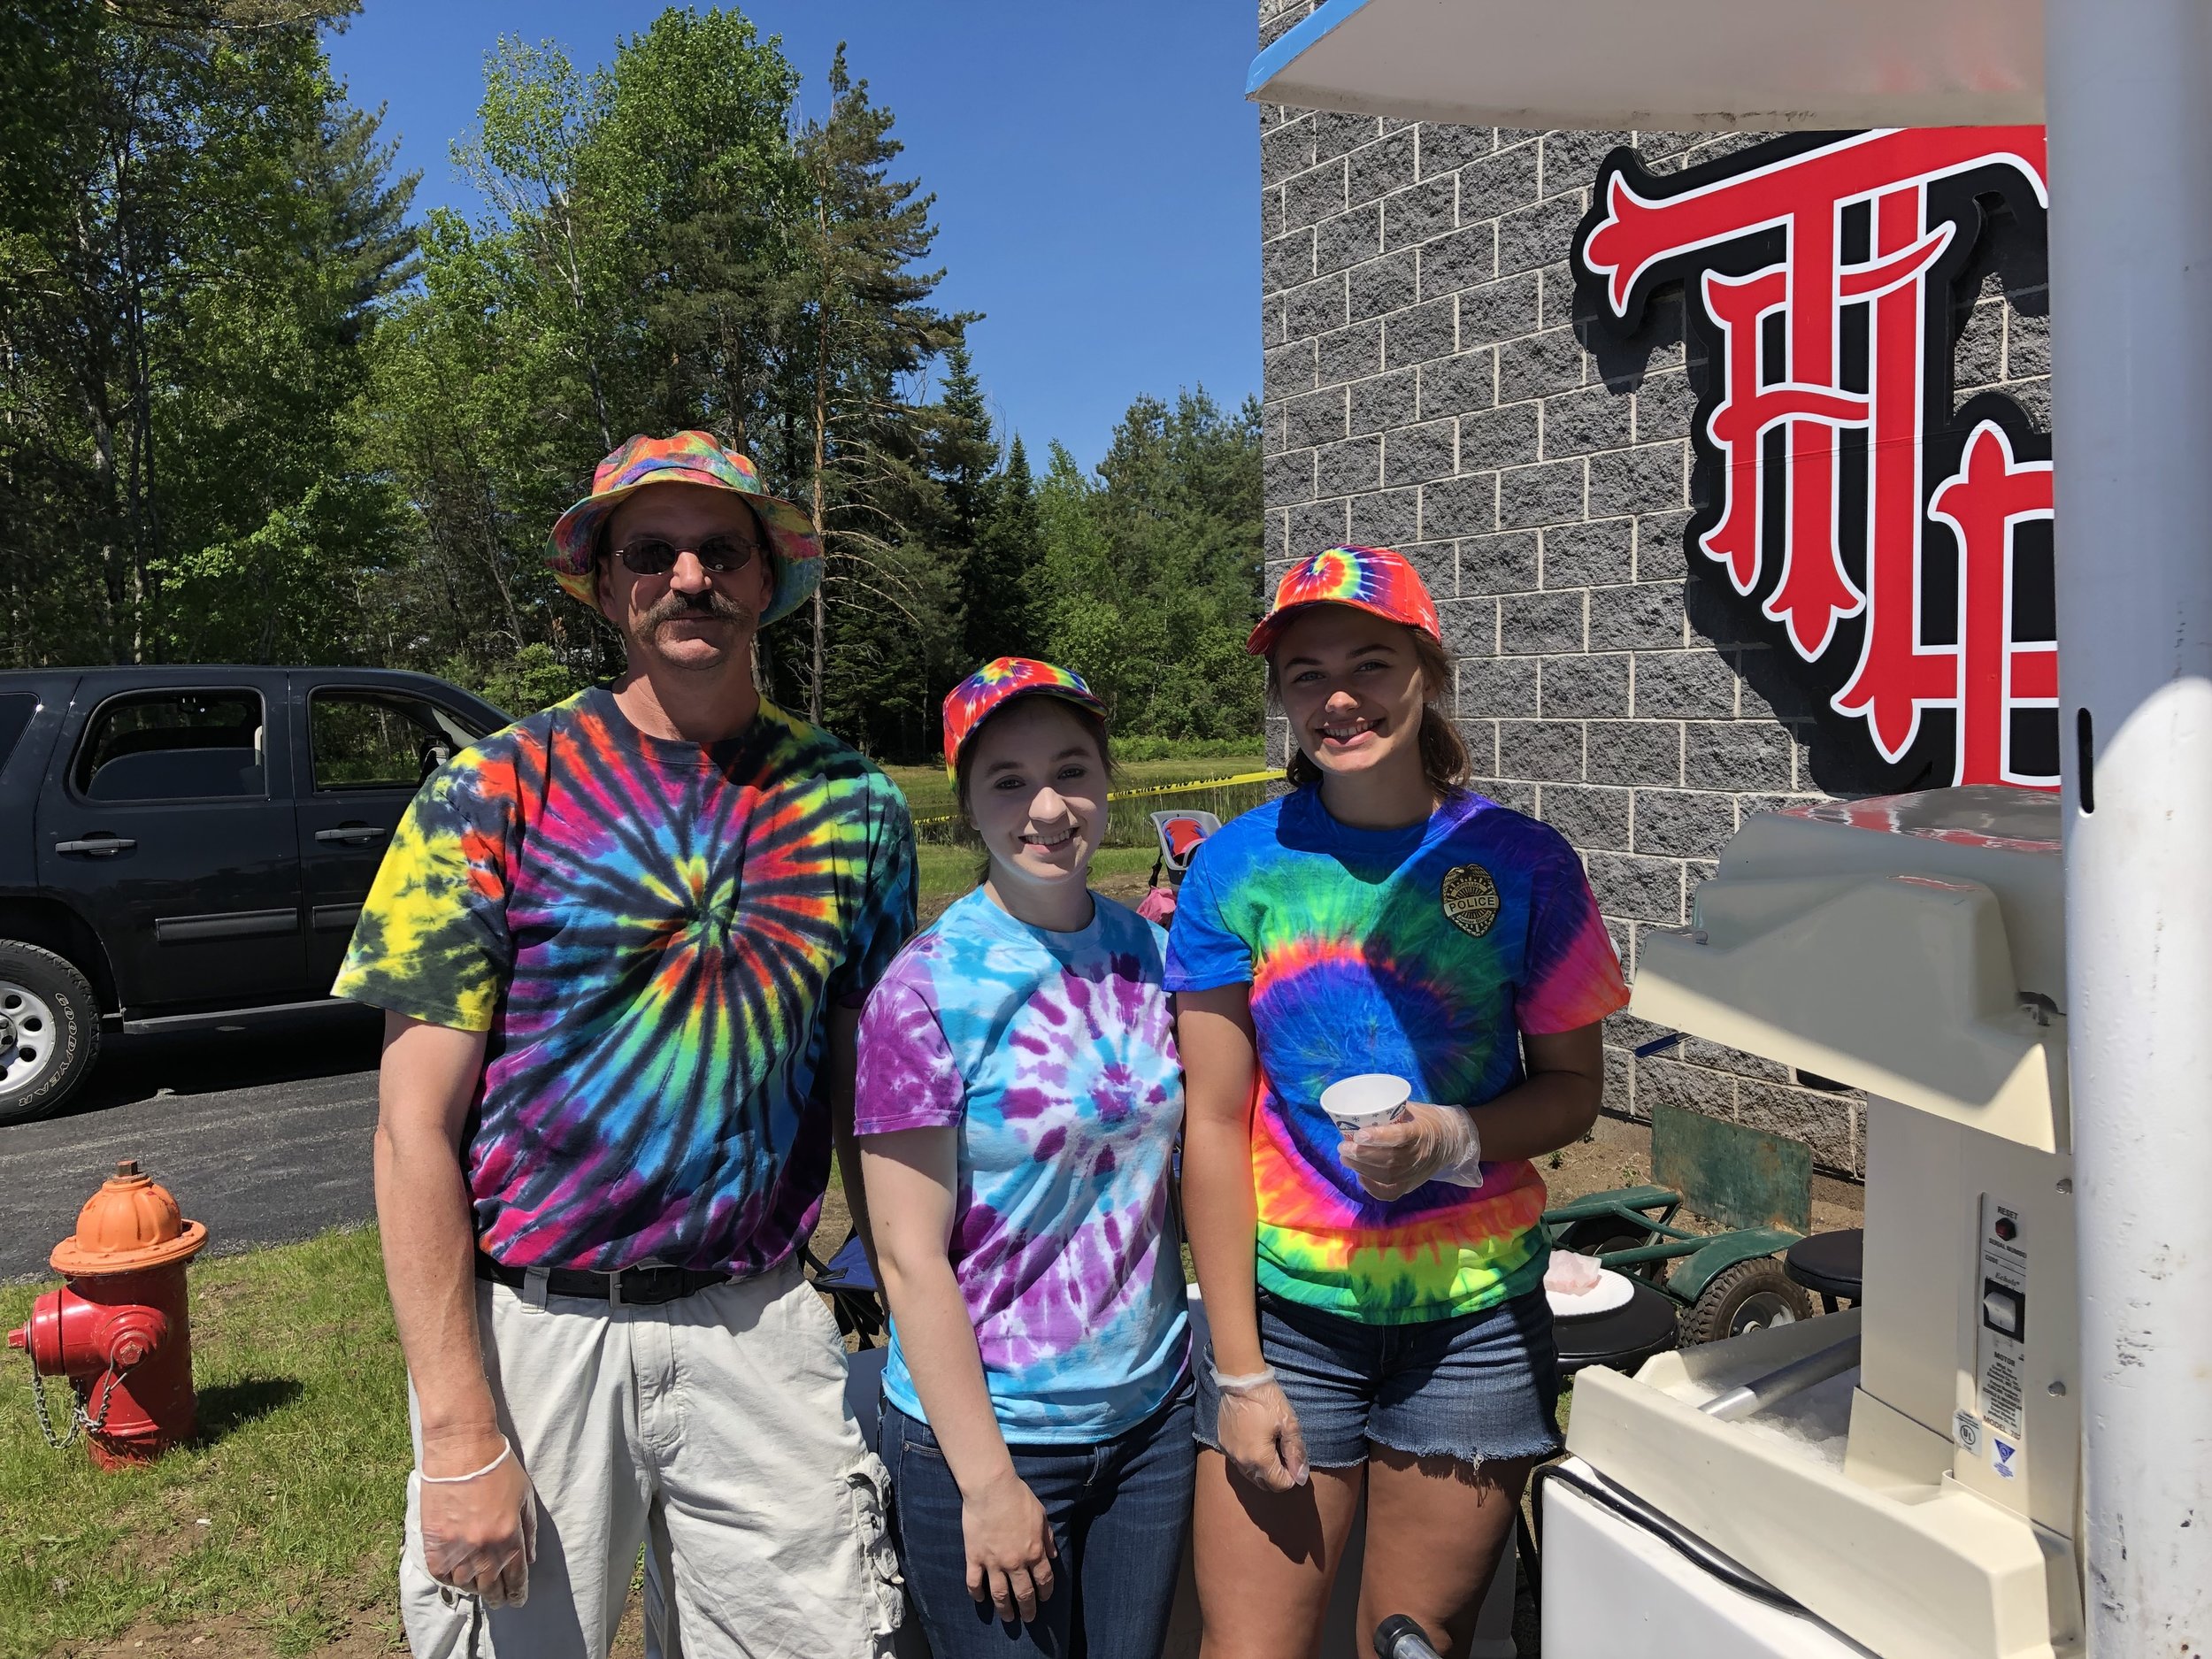   Carl Larson and his snow cone team Lindsay Remington and Rylie Fletcher kept their cool product flowing for thirsty bike riders. Over 375 cones they served.  